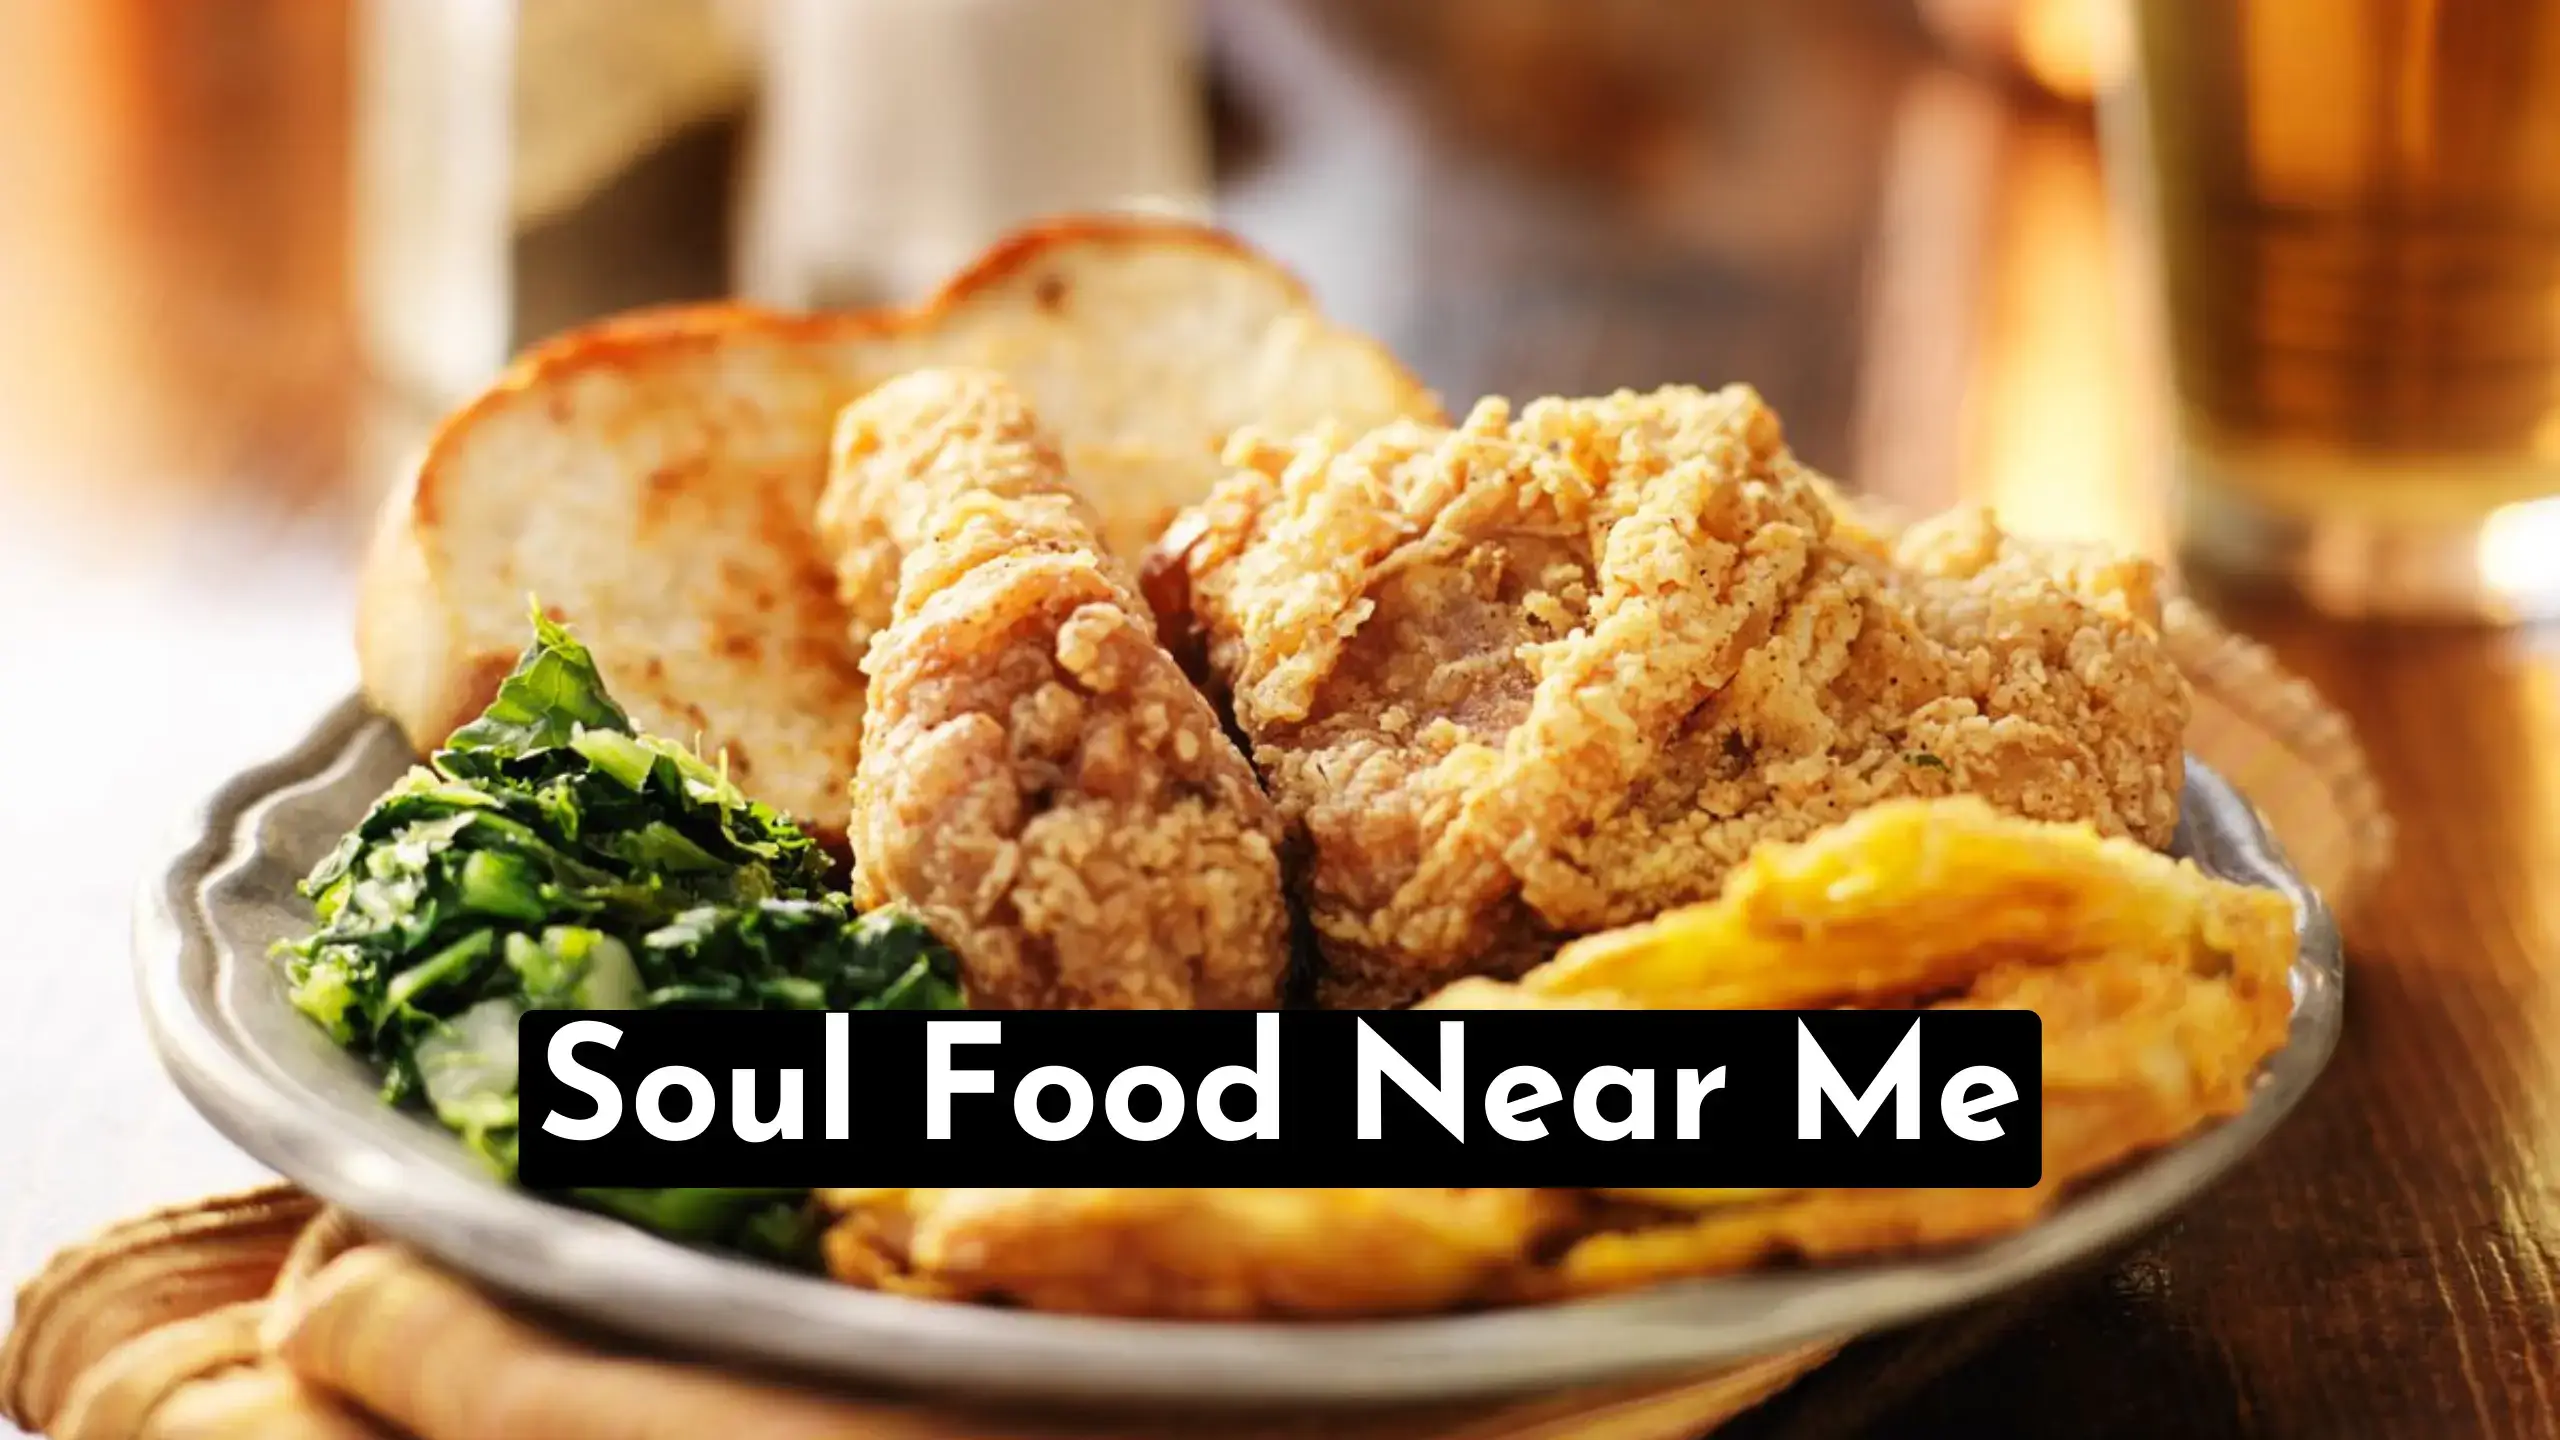 A Quick Way To Discover Best Soul Food Near Me Locations & Restaurants |Also Find The Best Vegan Soul Food Dishes To Eat With Health Benefits.